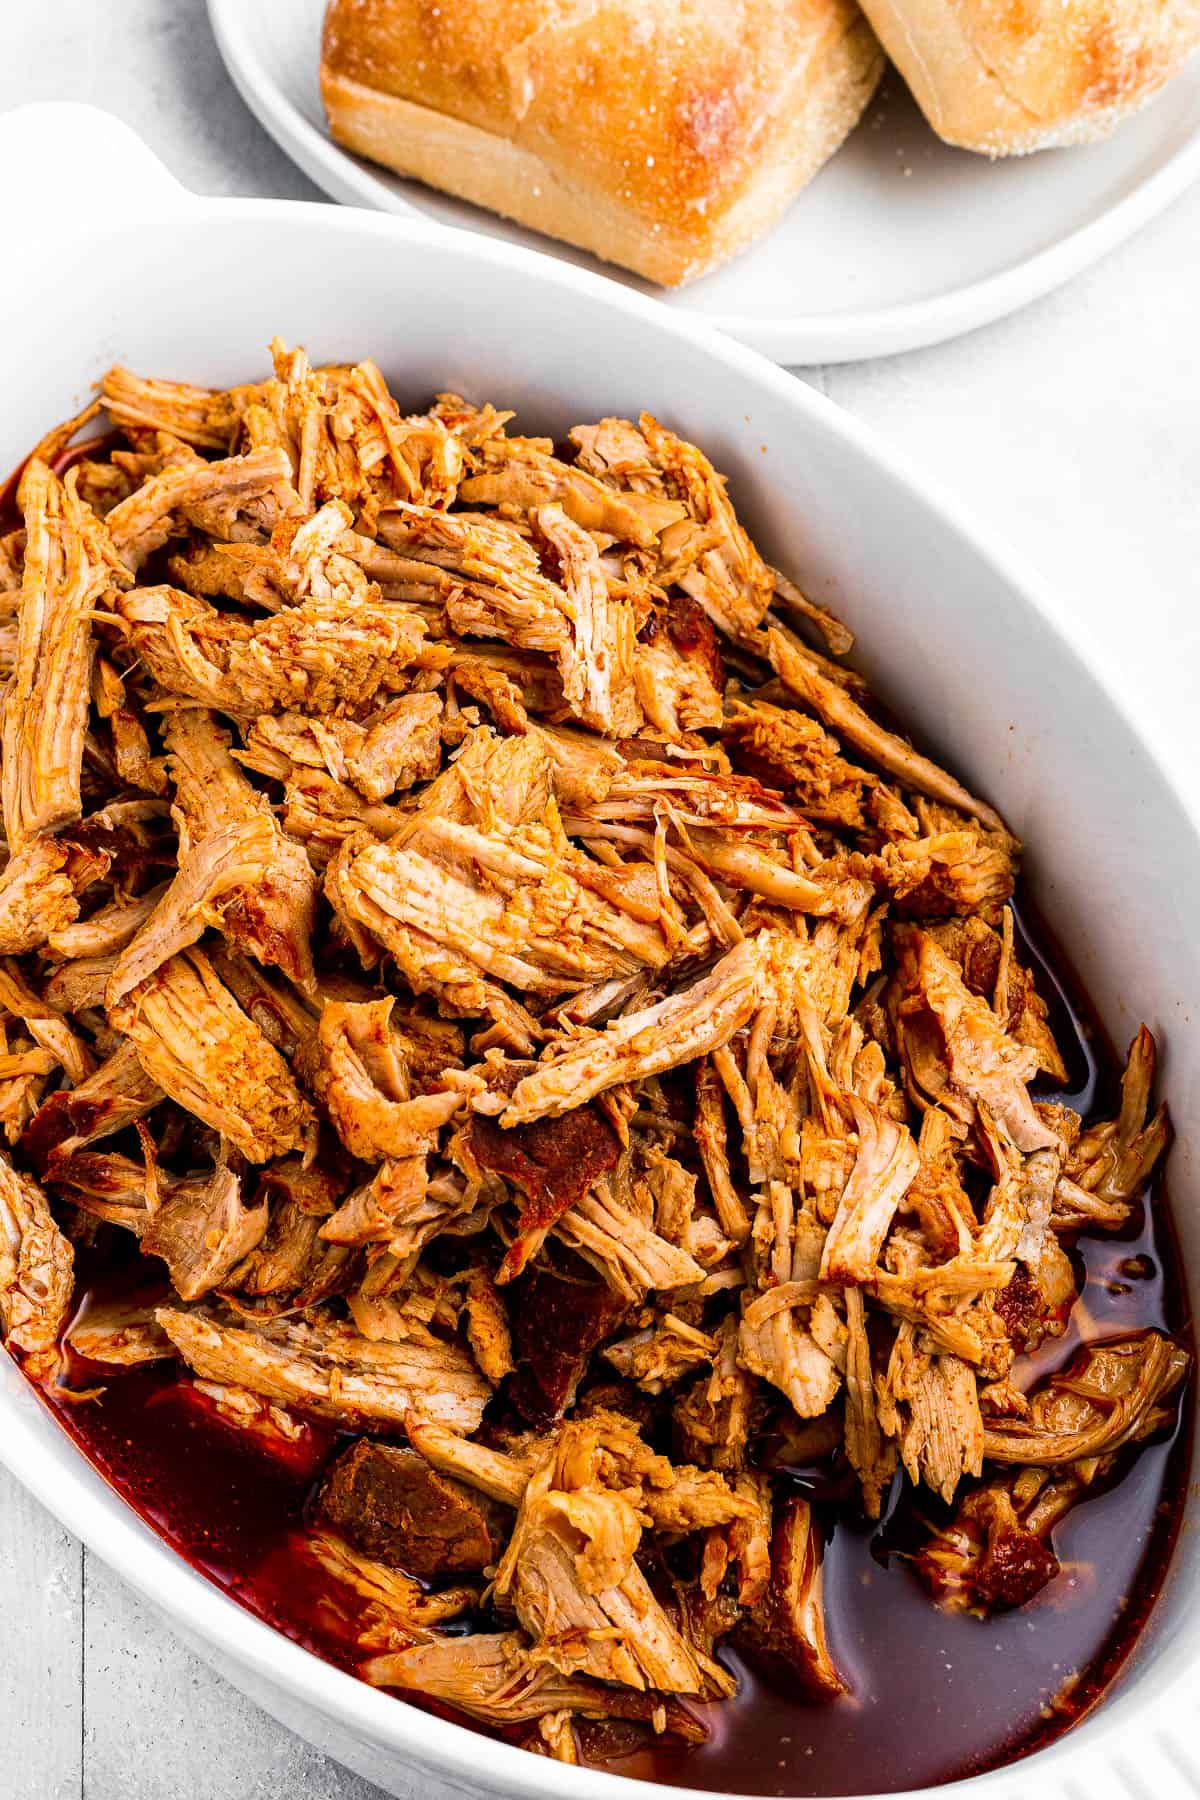 pulled pork in a baking dish